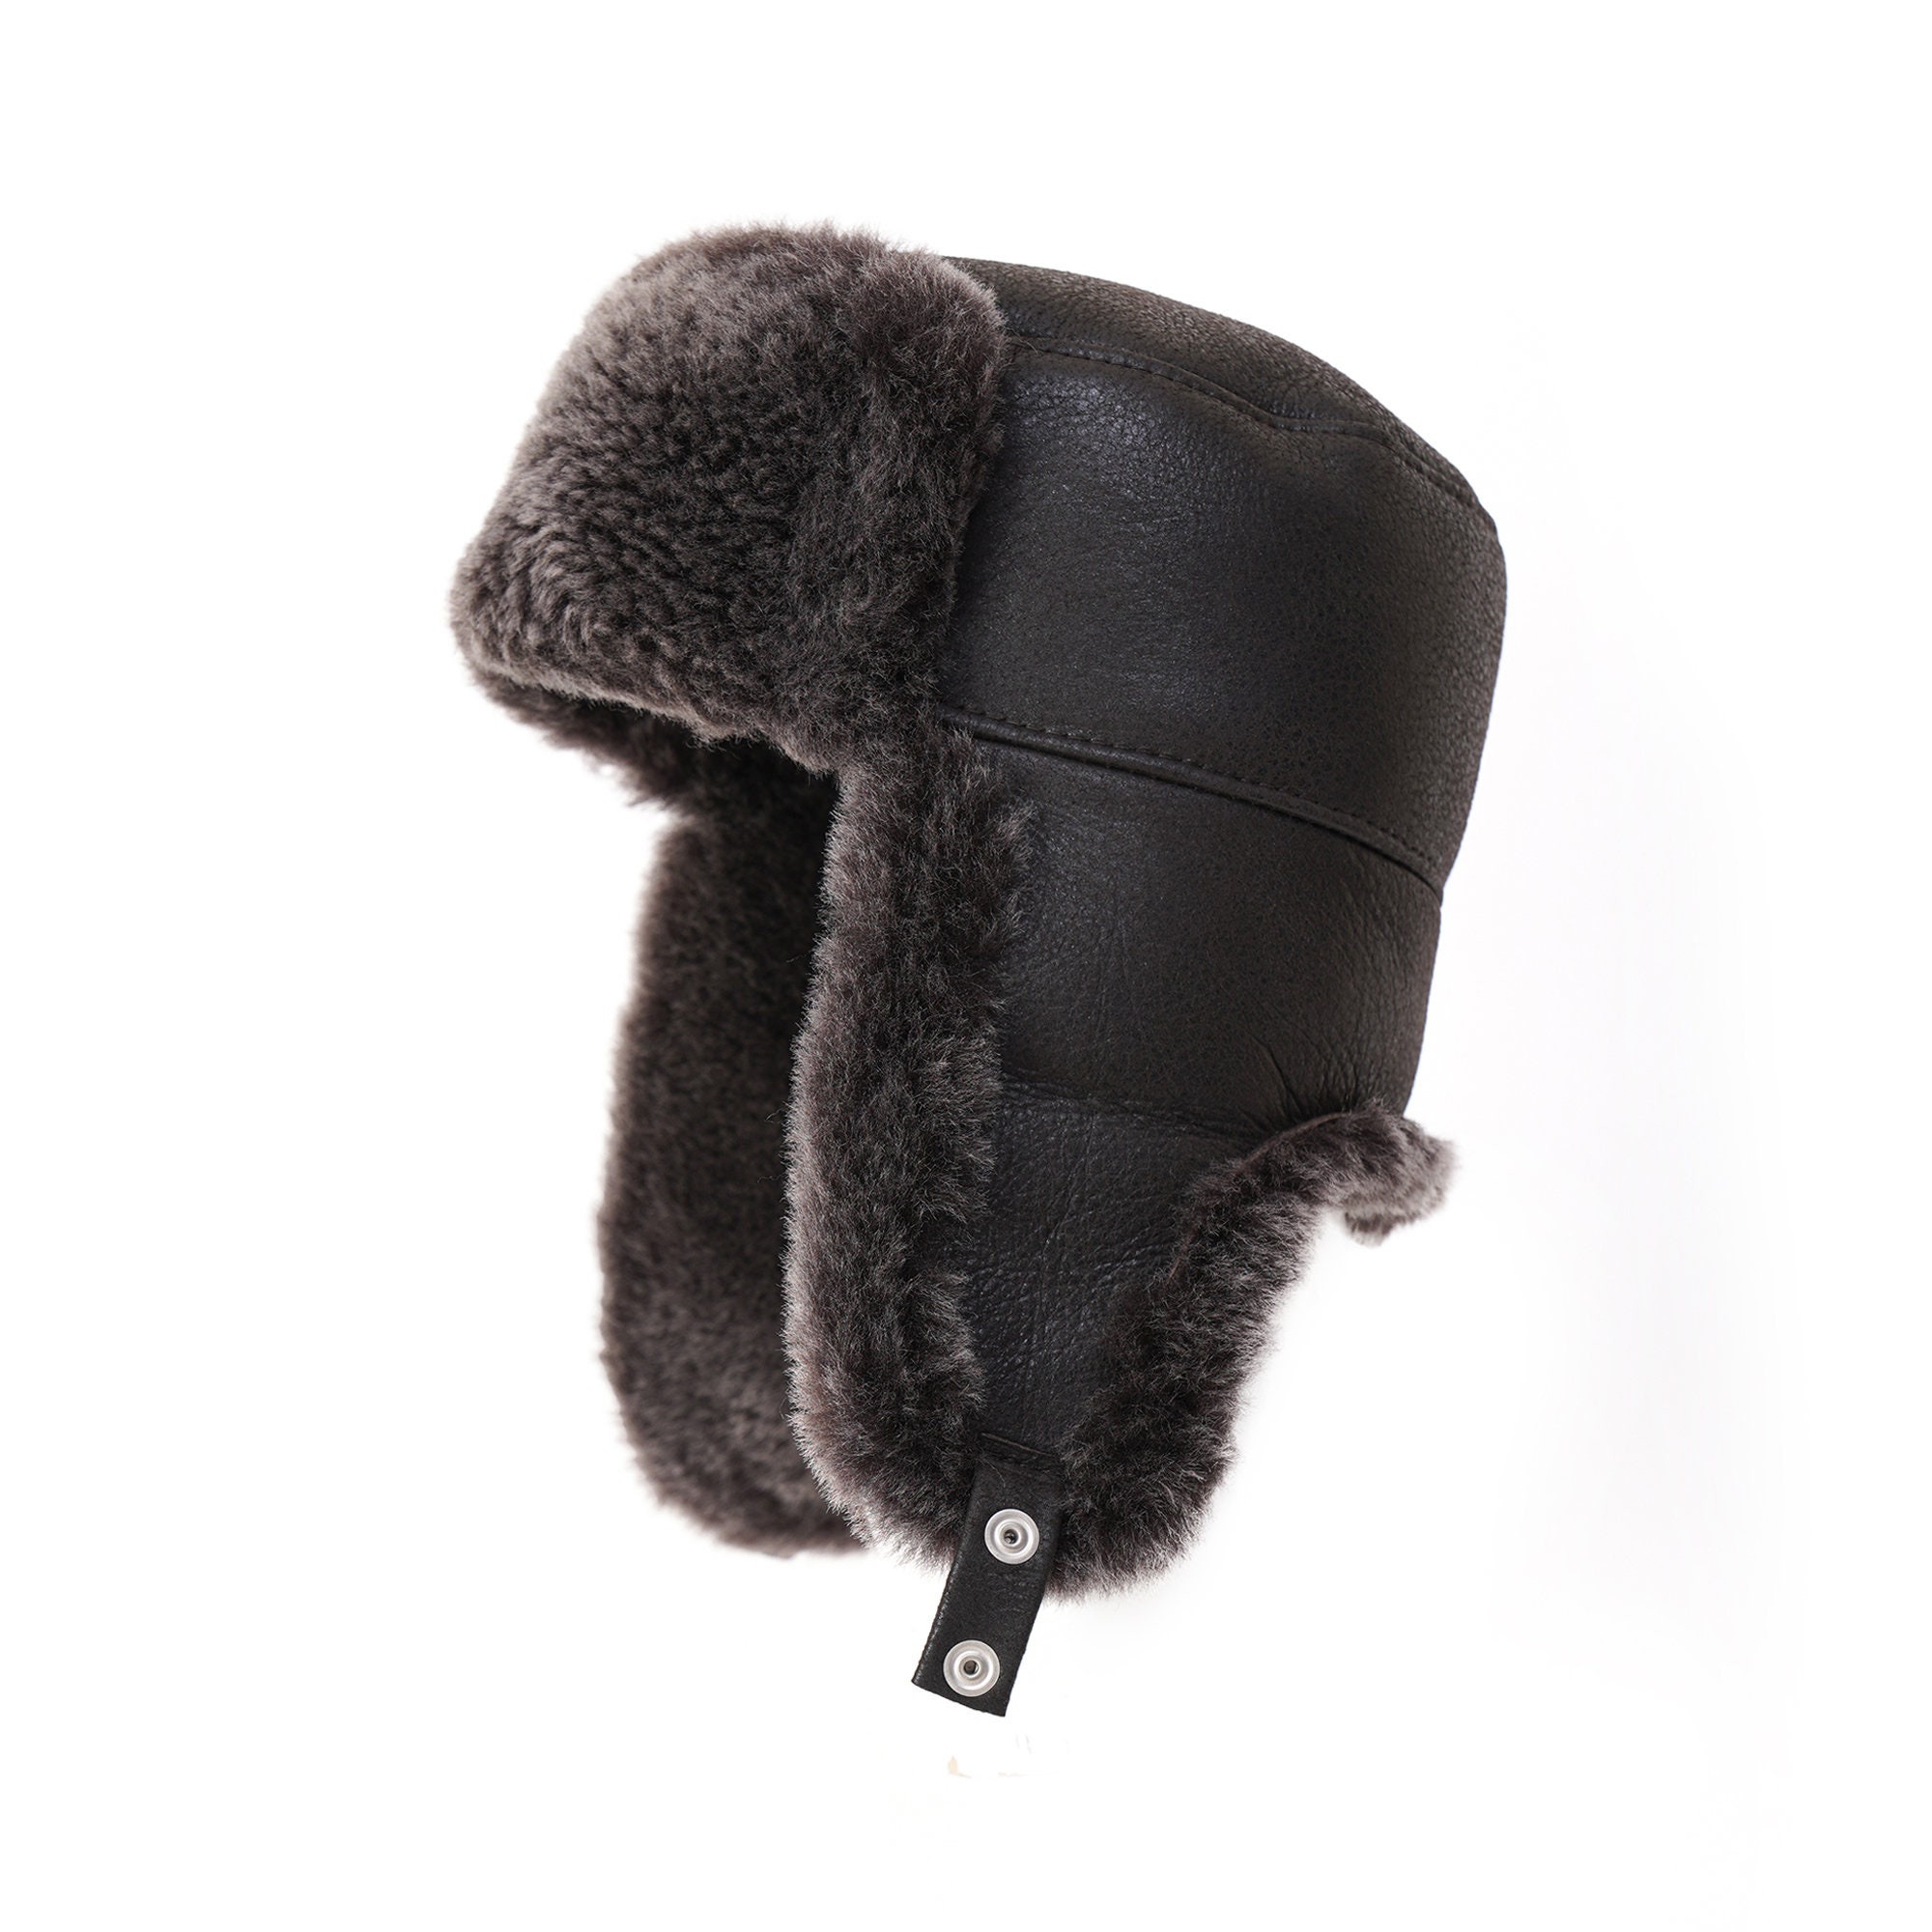 Russian Hat Mink Ushanka for sale| 91 ads for used Russian Hat Mink ...